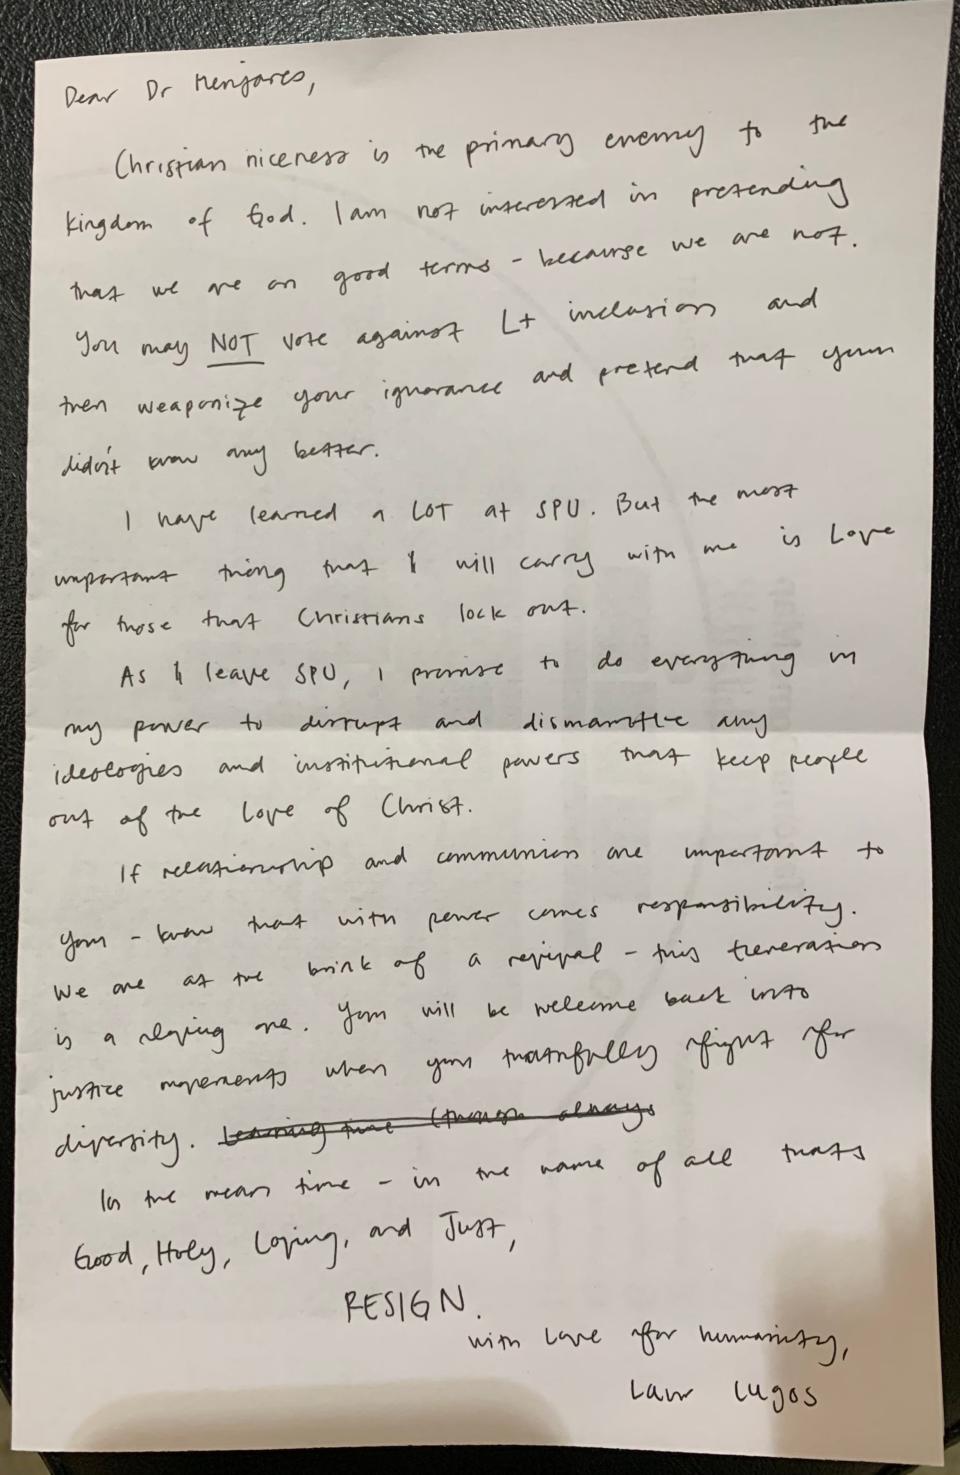 Recent Seattle Pacific University graduate Laur Lugos says this is the letter she handed to the school's interim president, Pete Menjares, instead of shaking his hand during the graduation ceremony on Sunday, June 12, 2022.